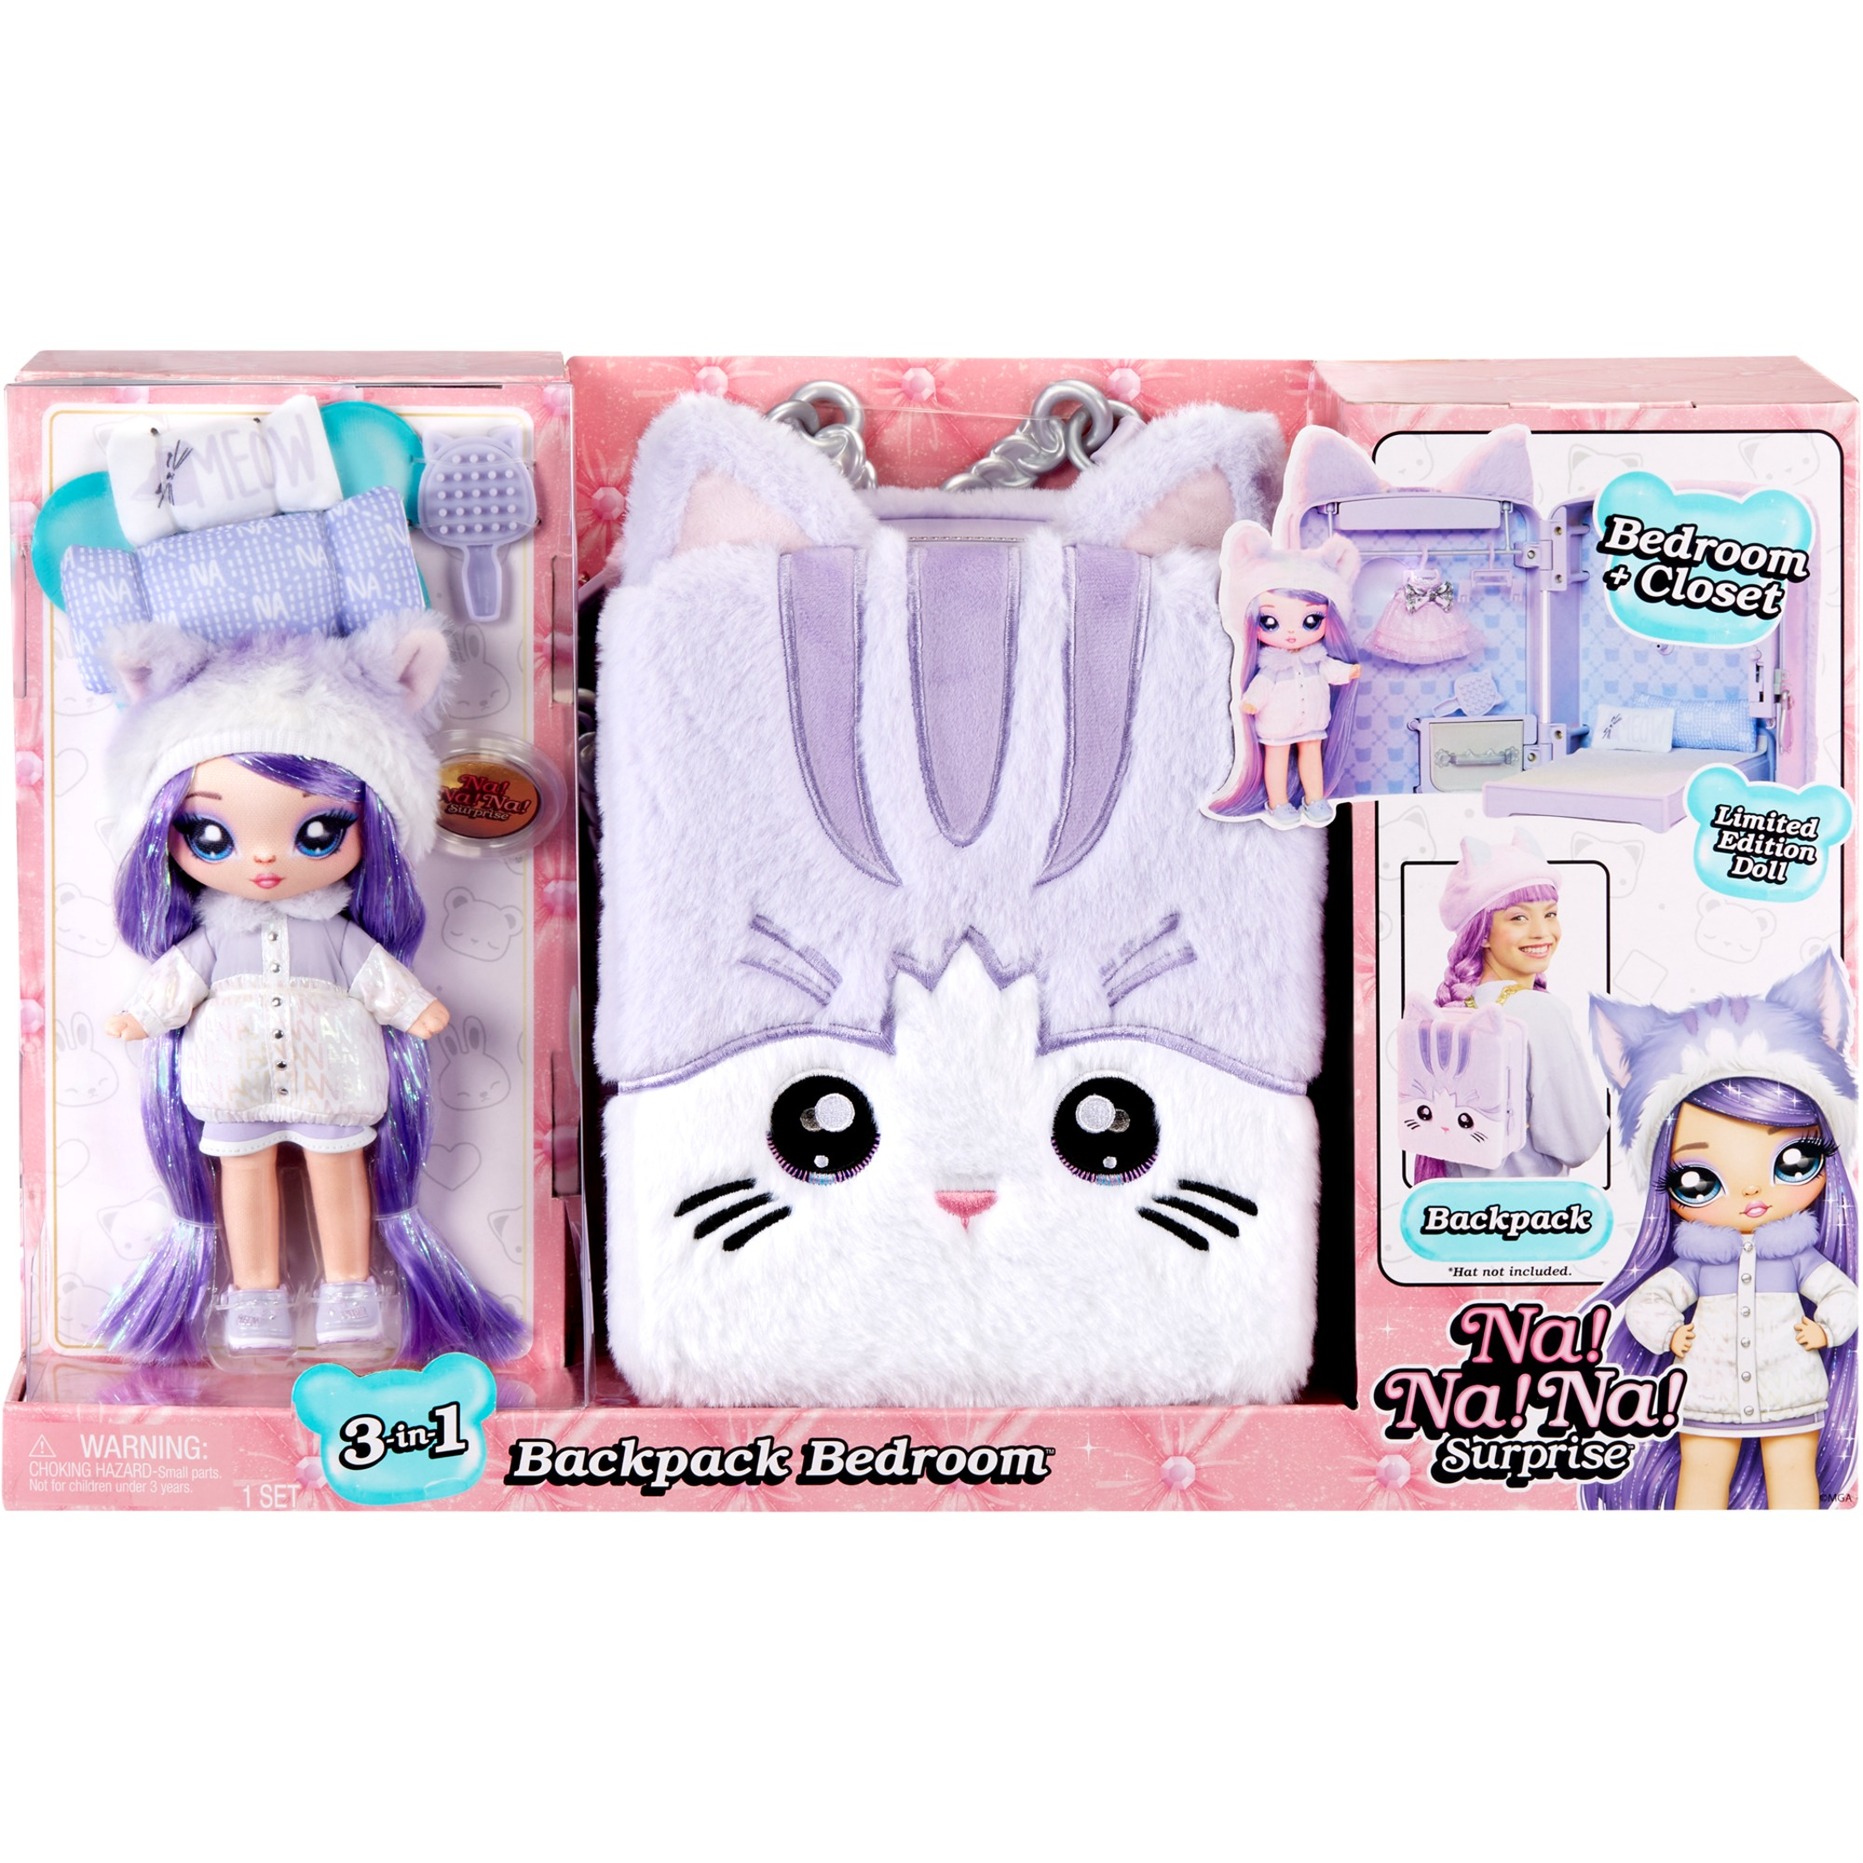 Na! Na! Na! Surprise 585572EUC 3-in-1 Backpack Bedroom Series 3 Playset-Lavender Kitty